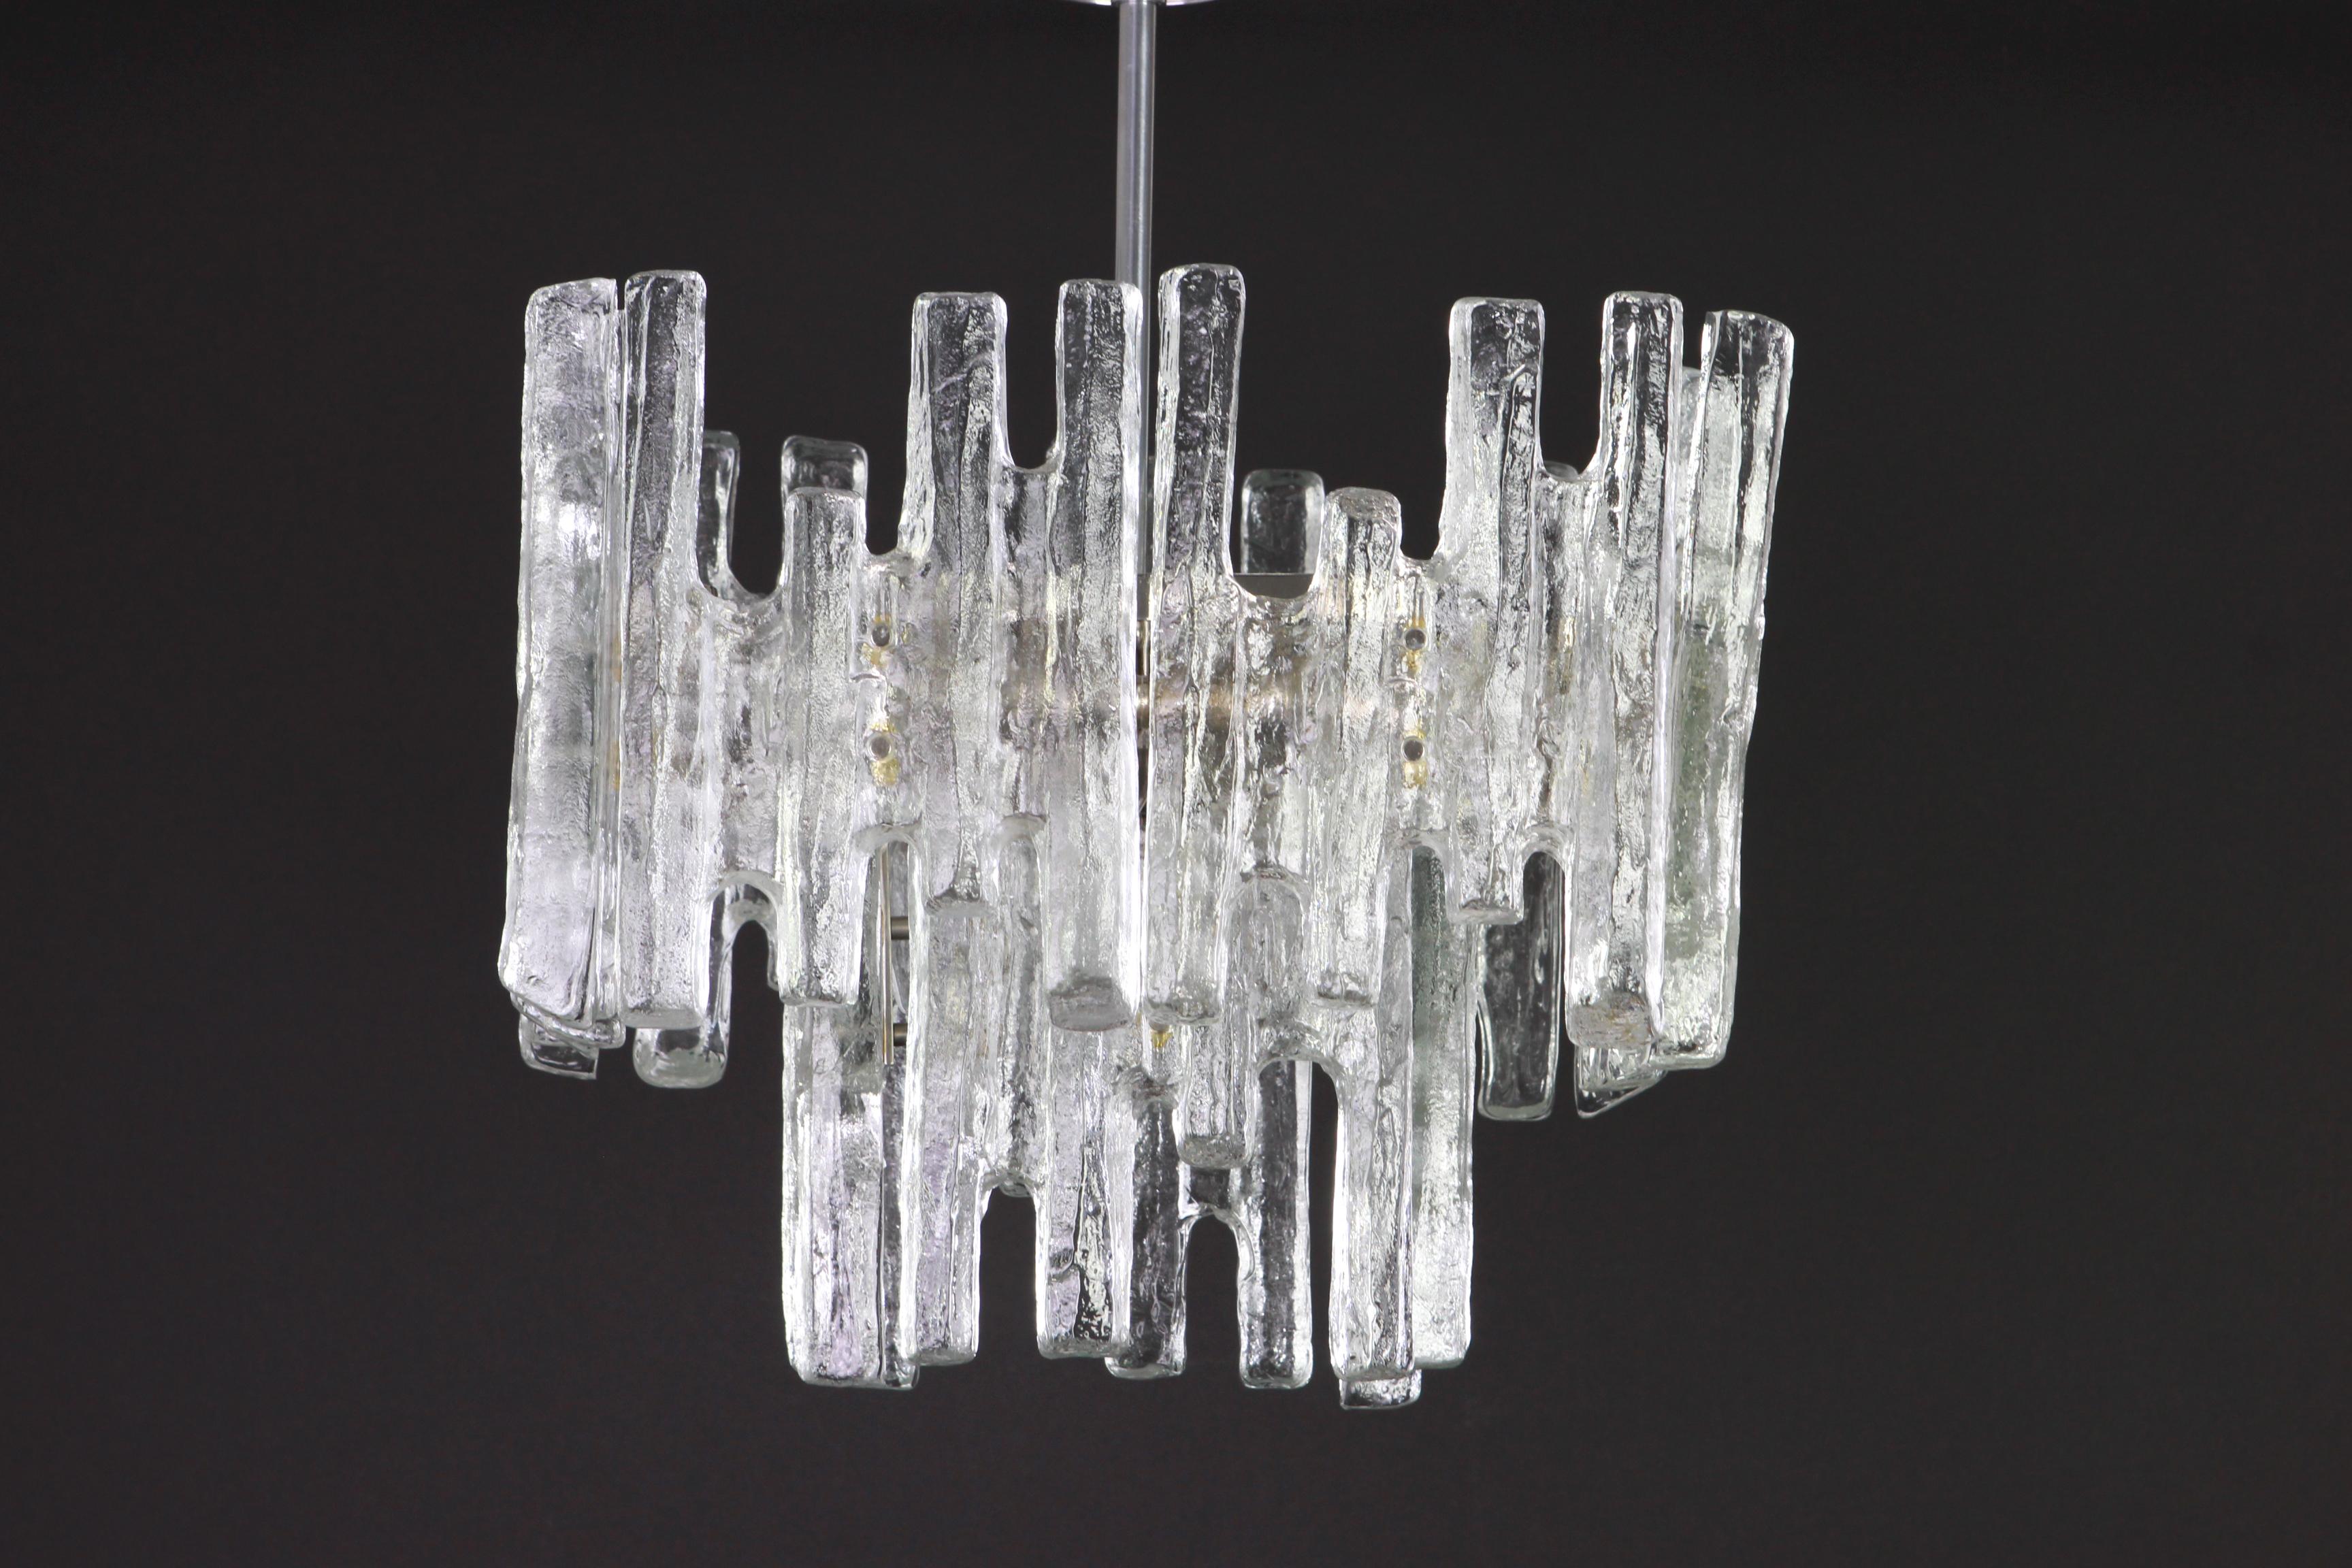 Large Rare Murano Ice Glass Chandelier by Kalmar, Austria, 1960s For Sale 1